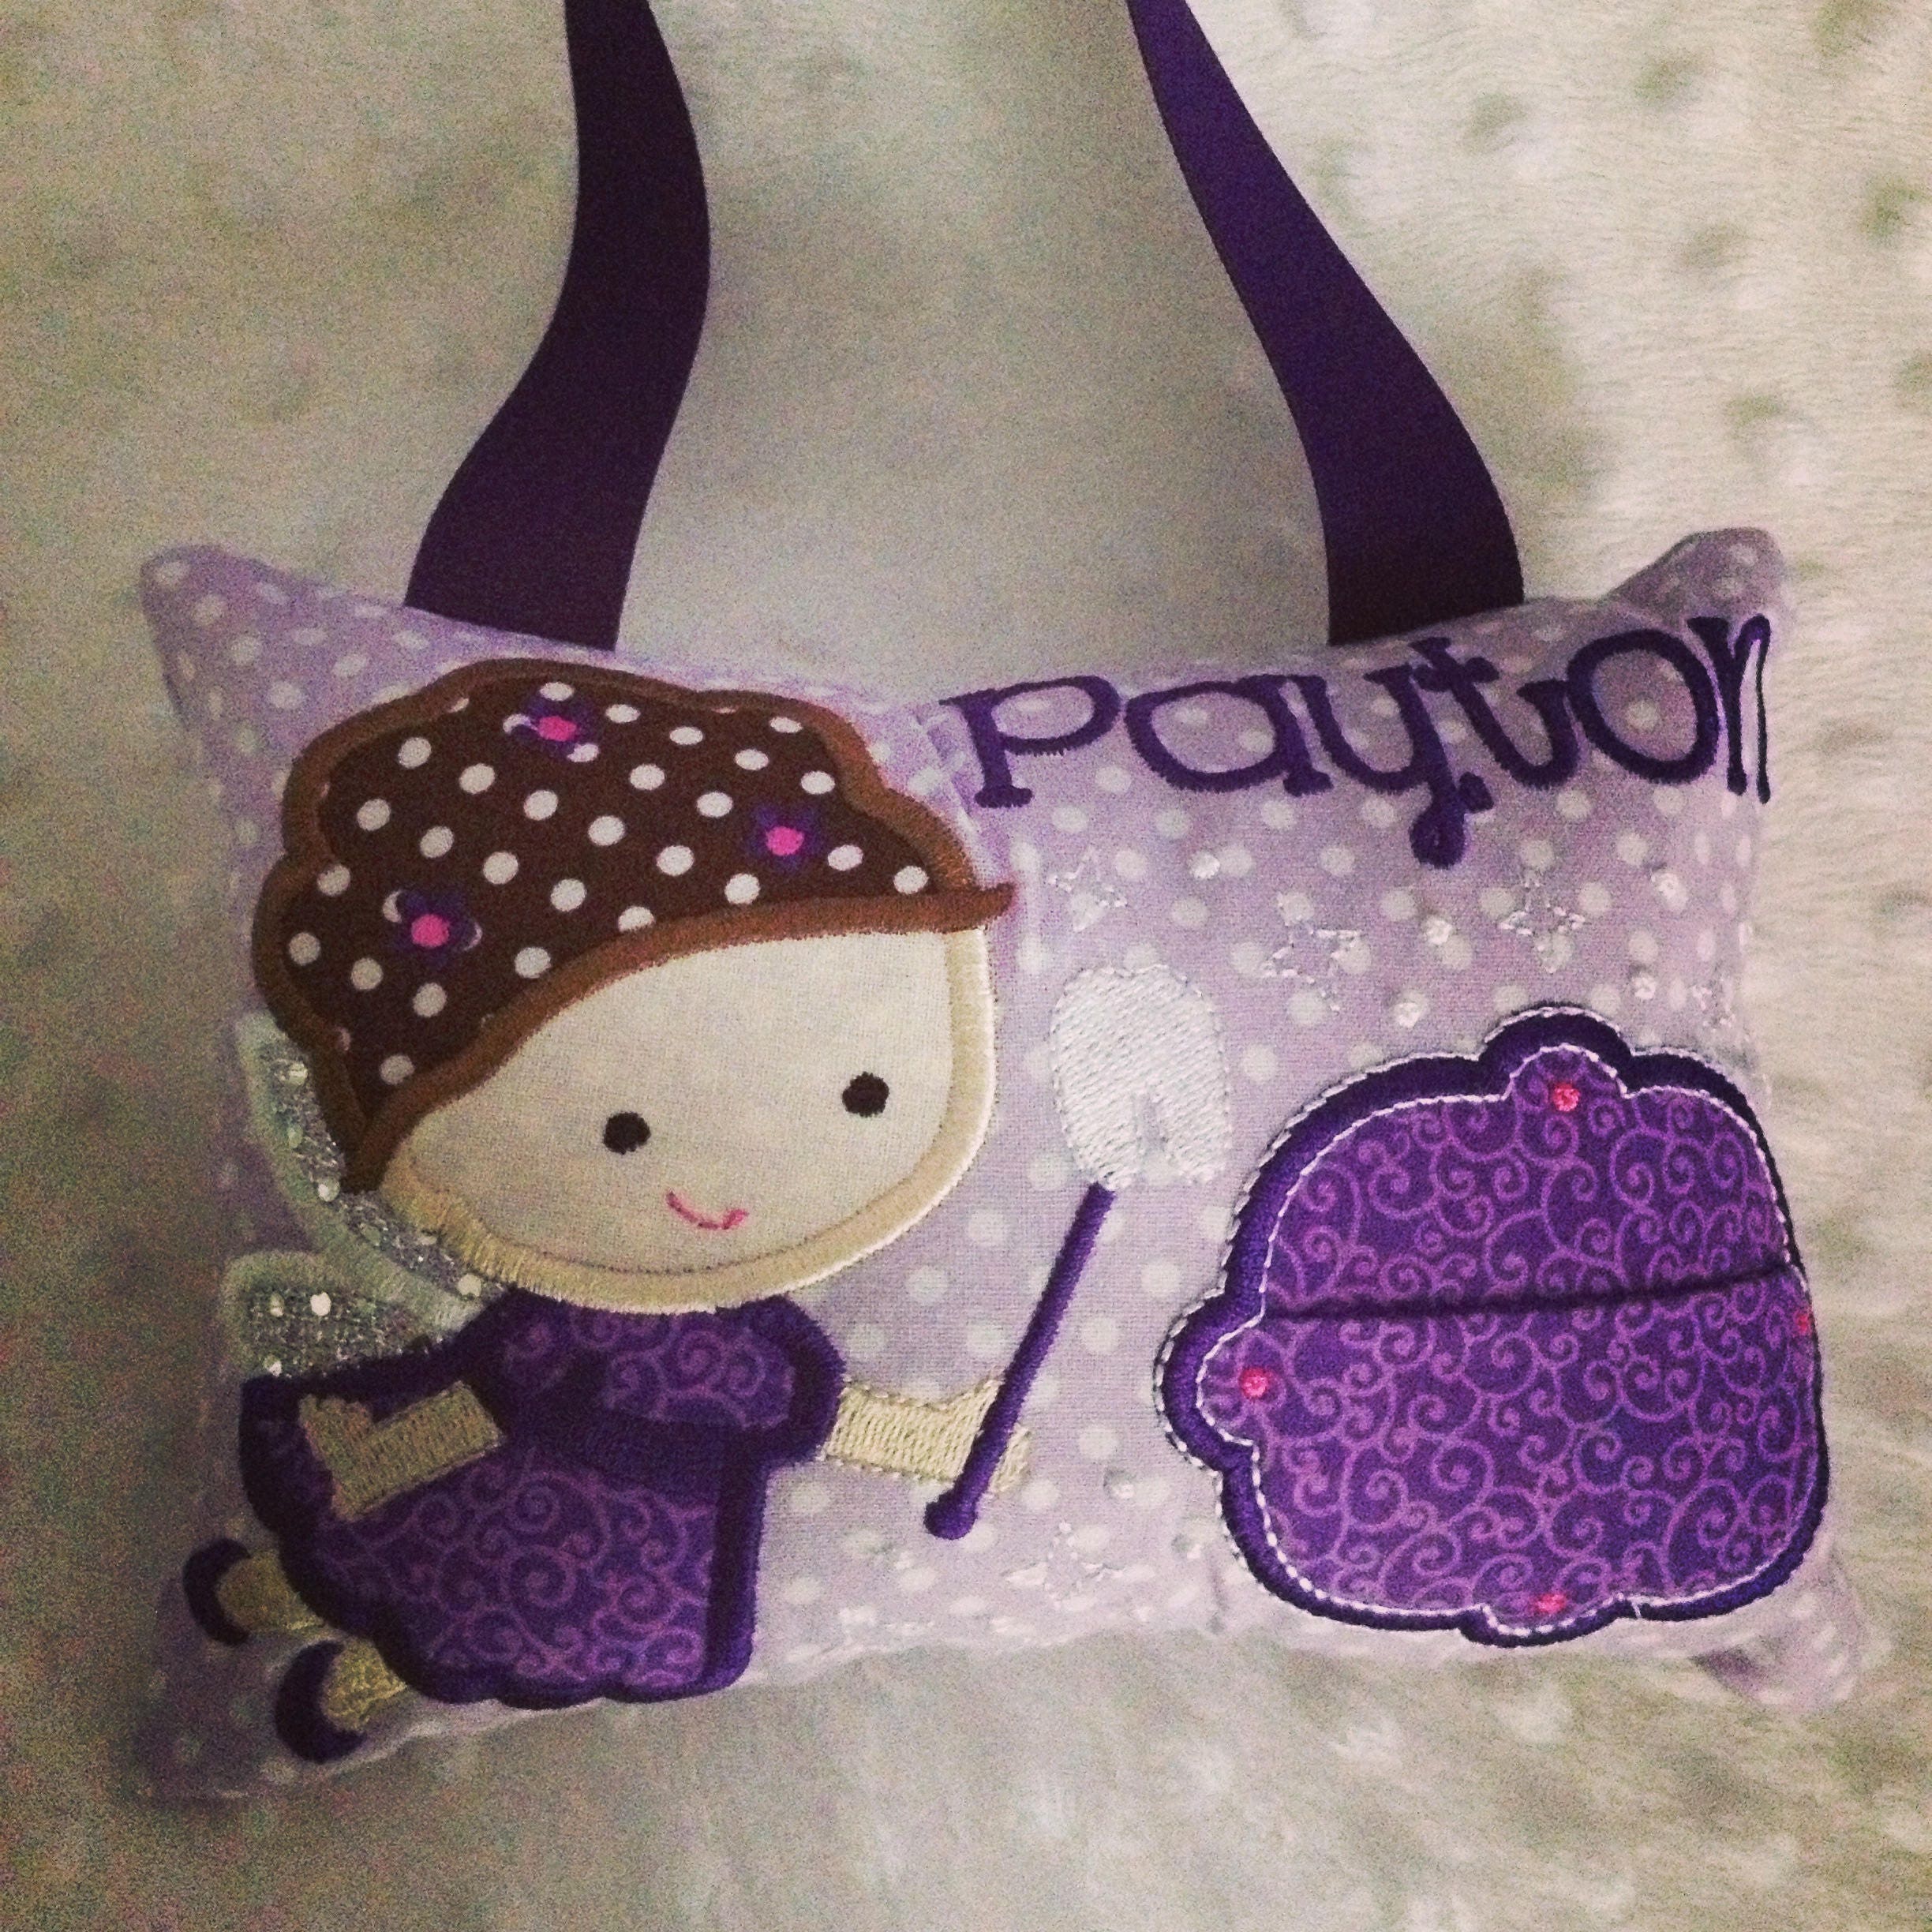 Girl's Tooth Fairy Pillow in Purple and Lavender, door or bedpost hanger, ToothFairy Pillow, Tooth Pillow